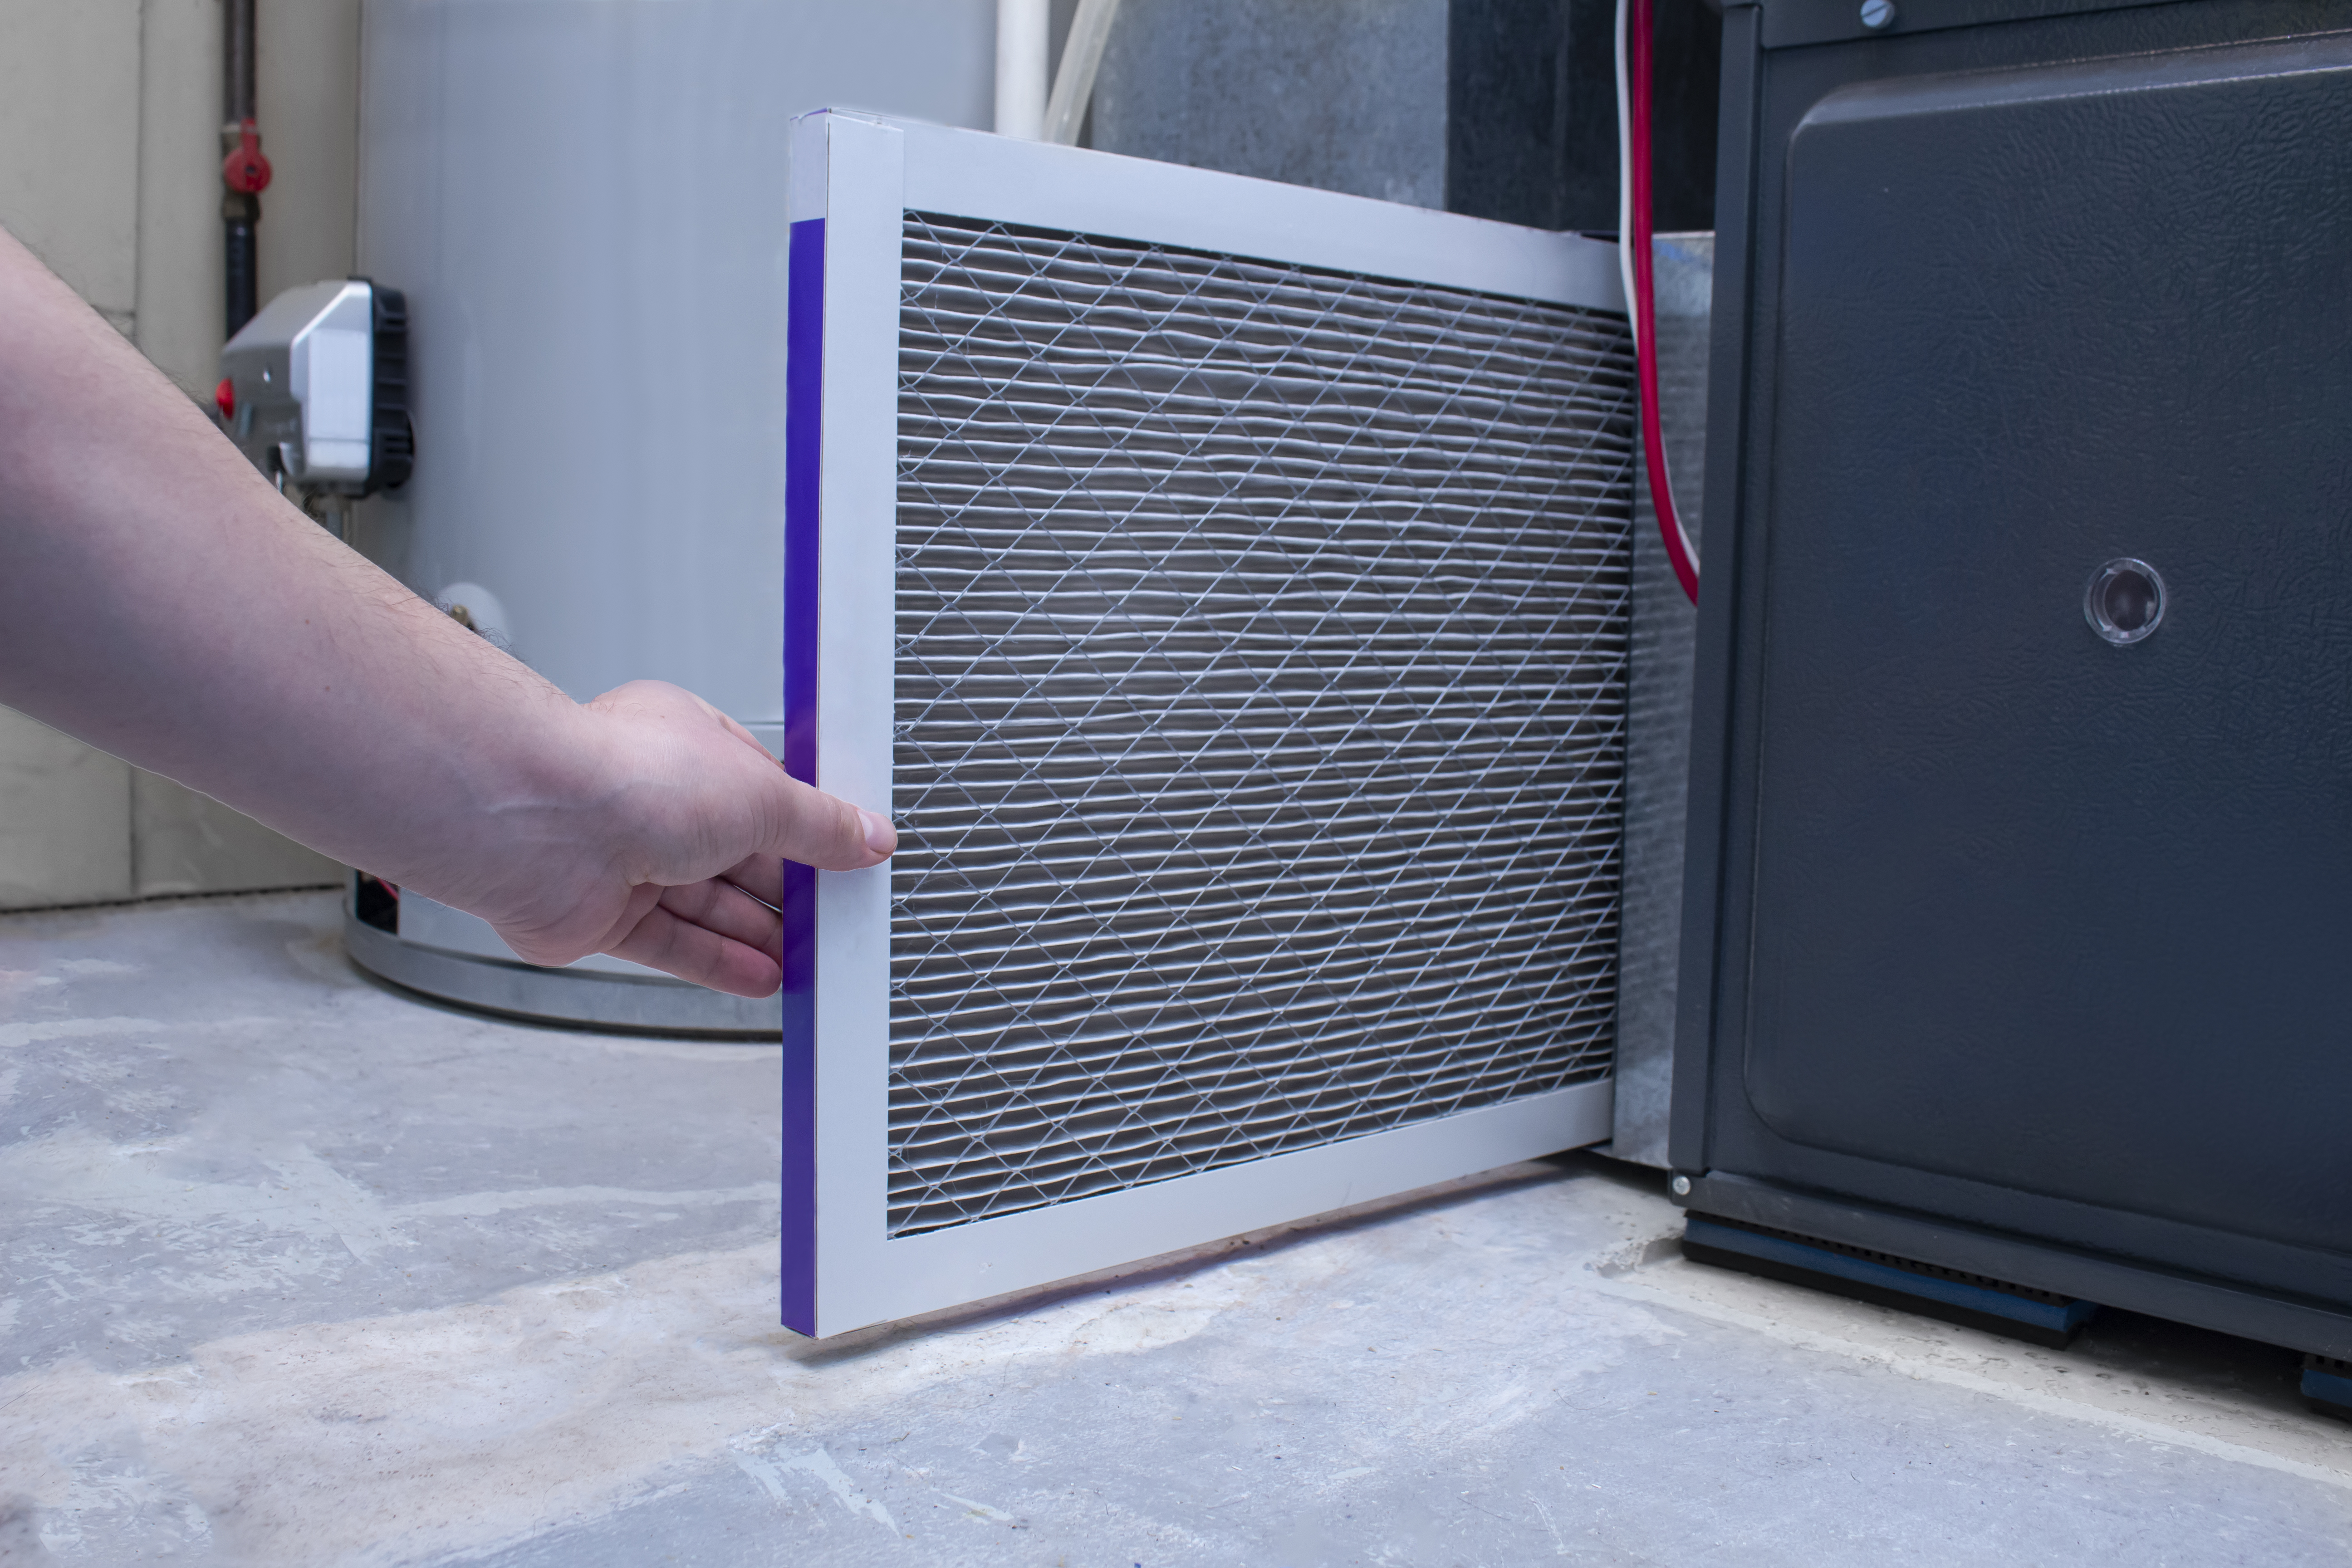 How To Change A Coleman Furnace Filter